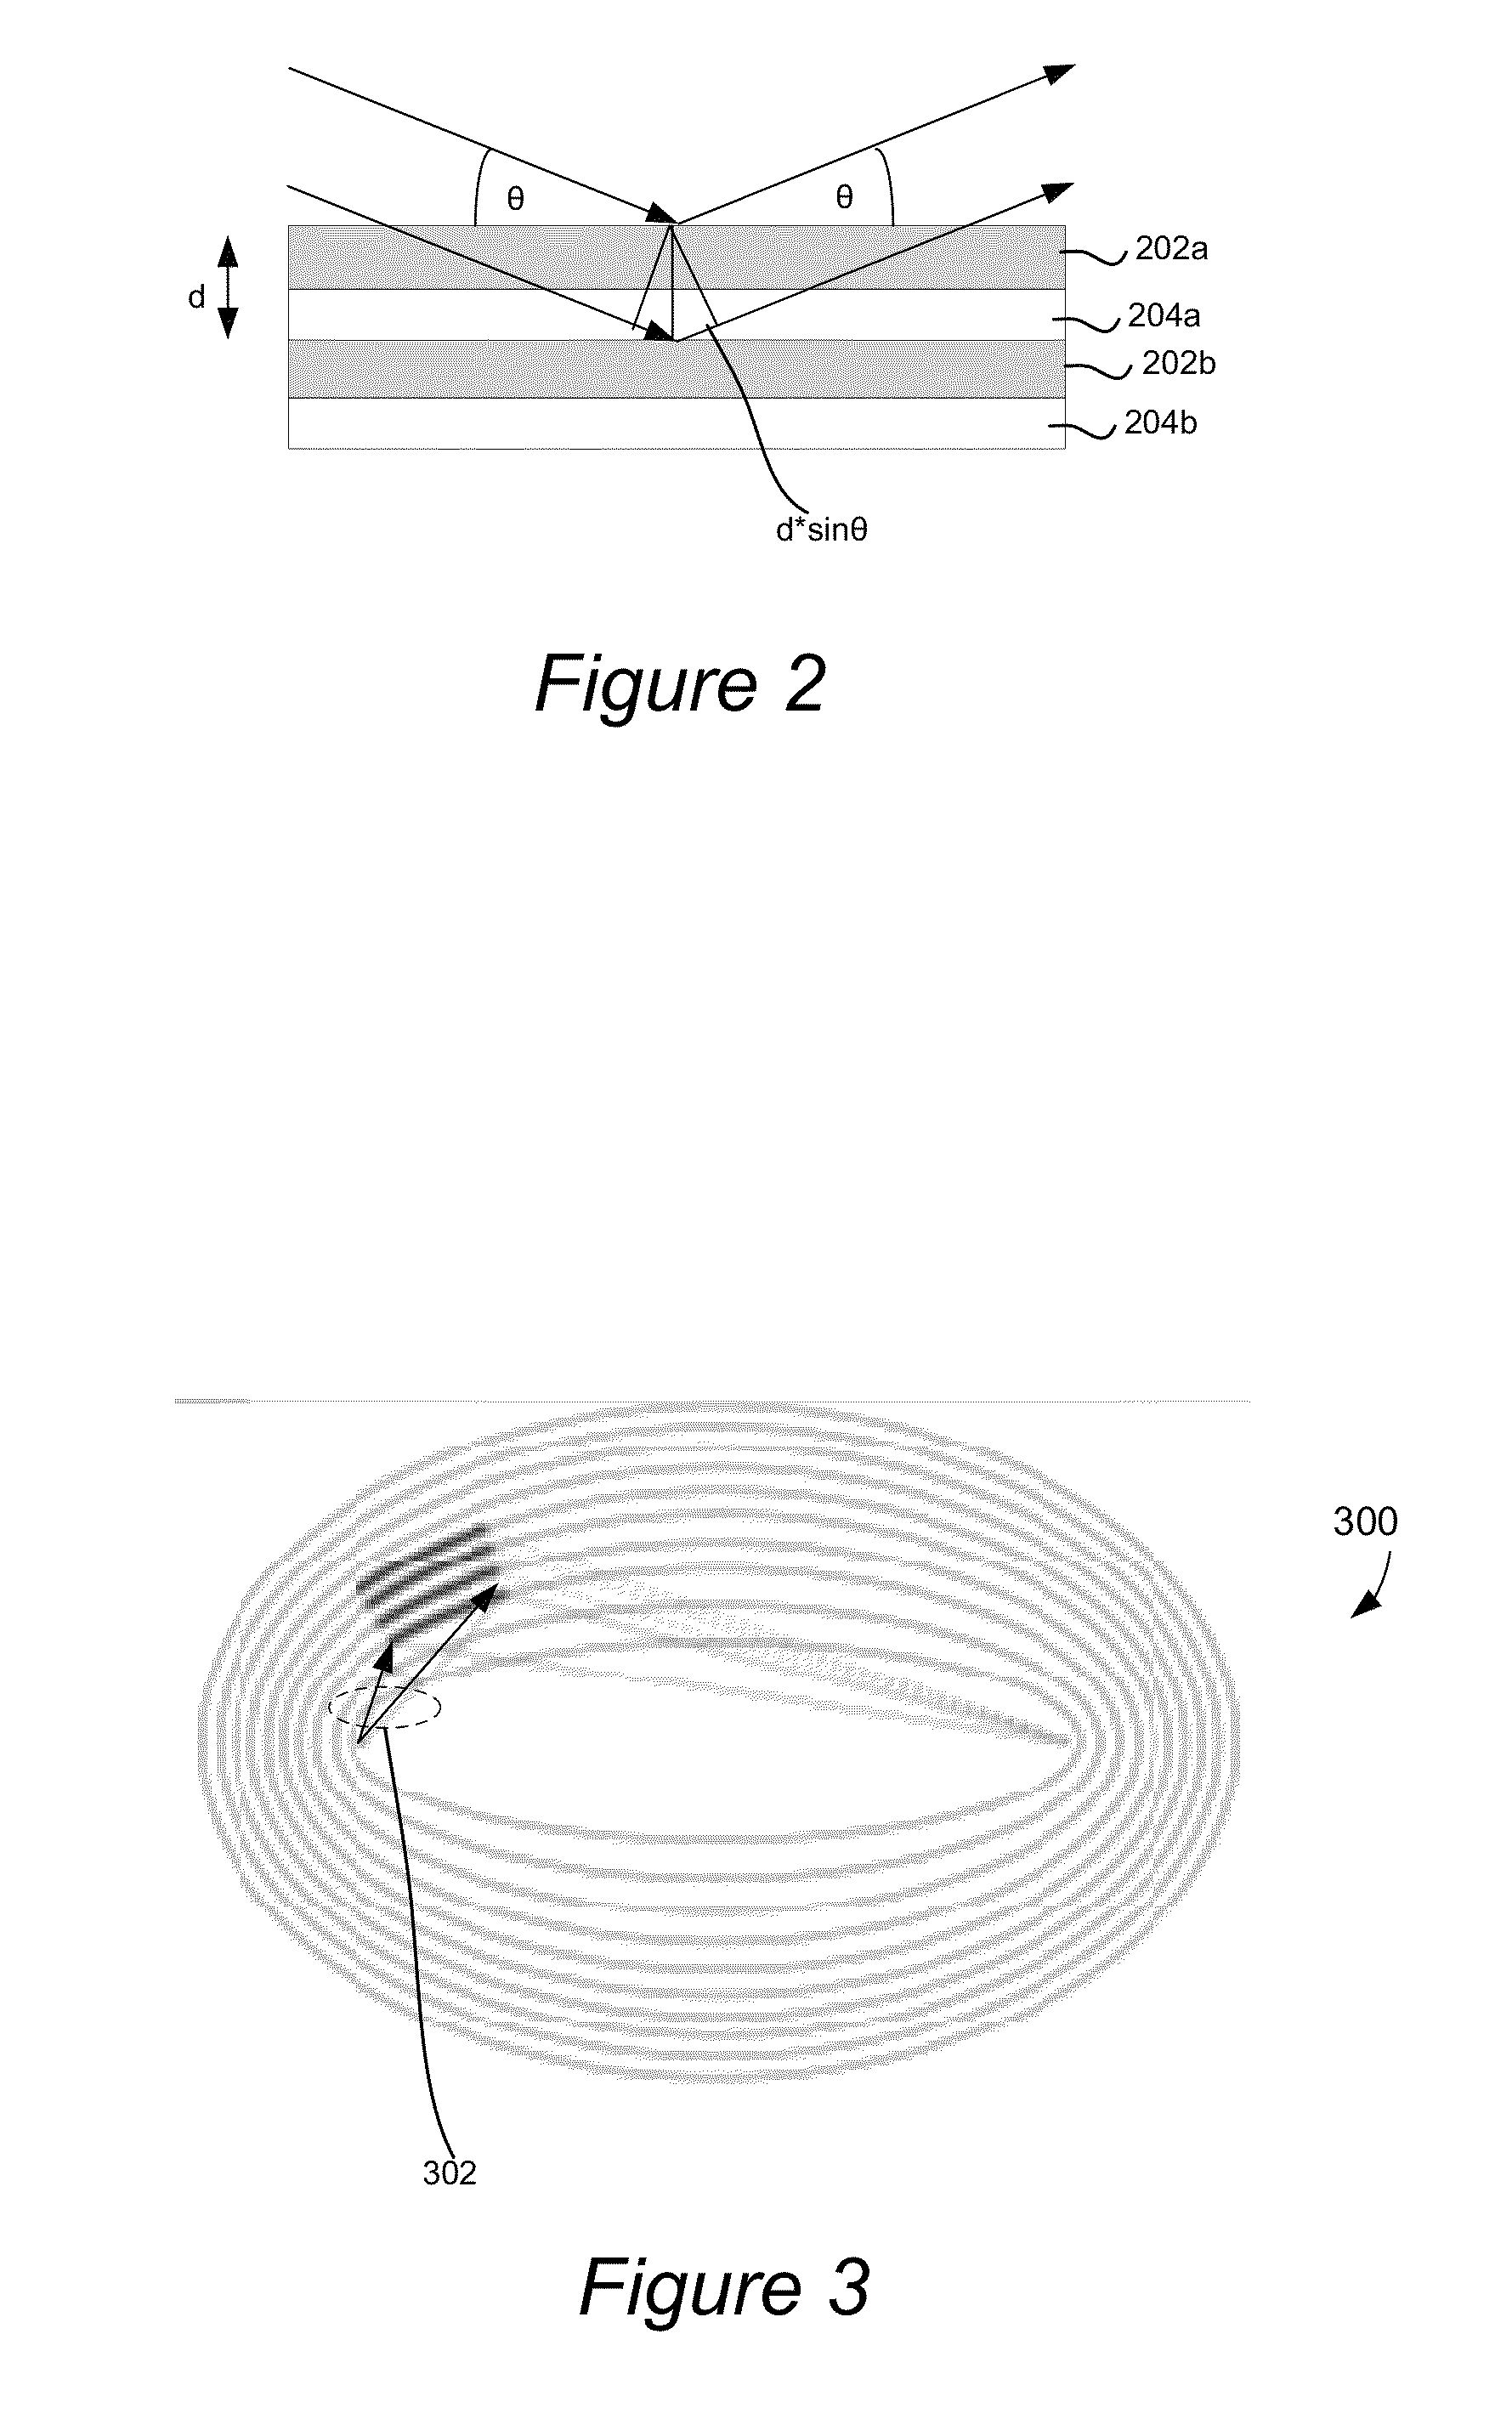 Small-angle scattering x-ray metrology systems and methods